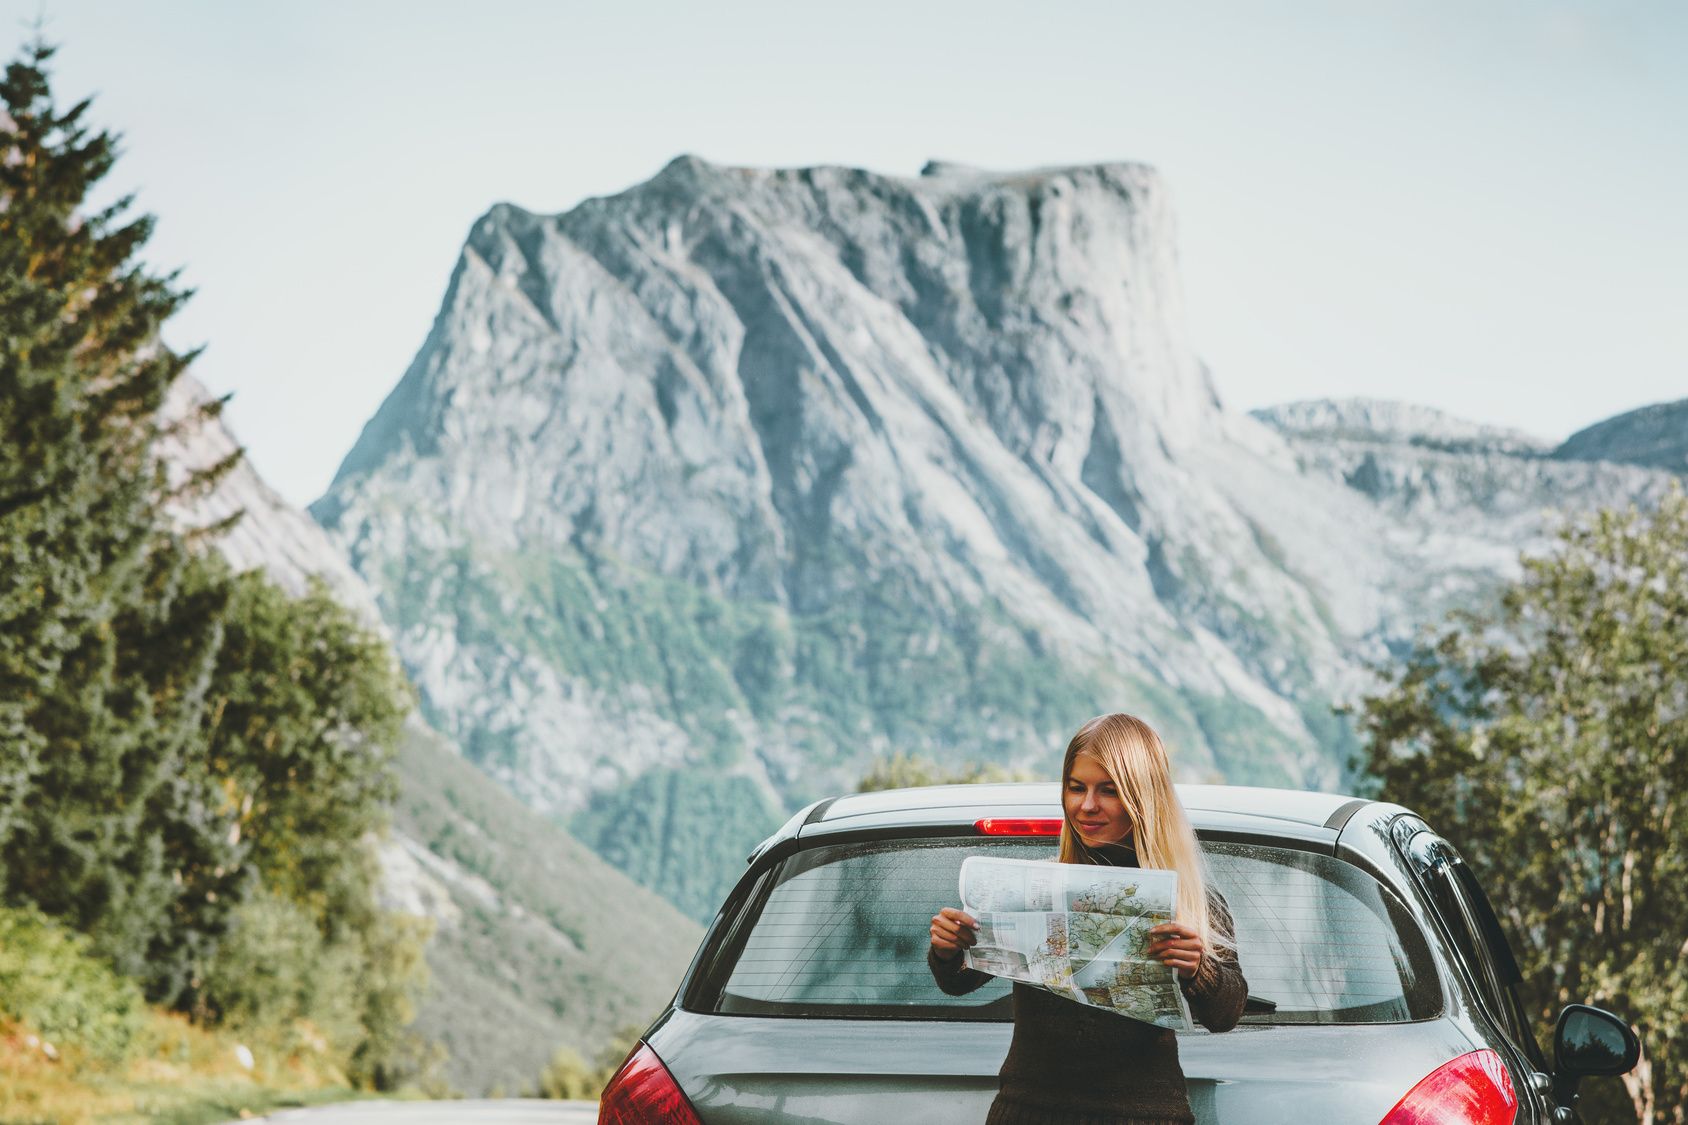 blond woman reads a map in front of mountains